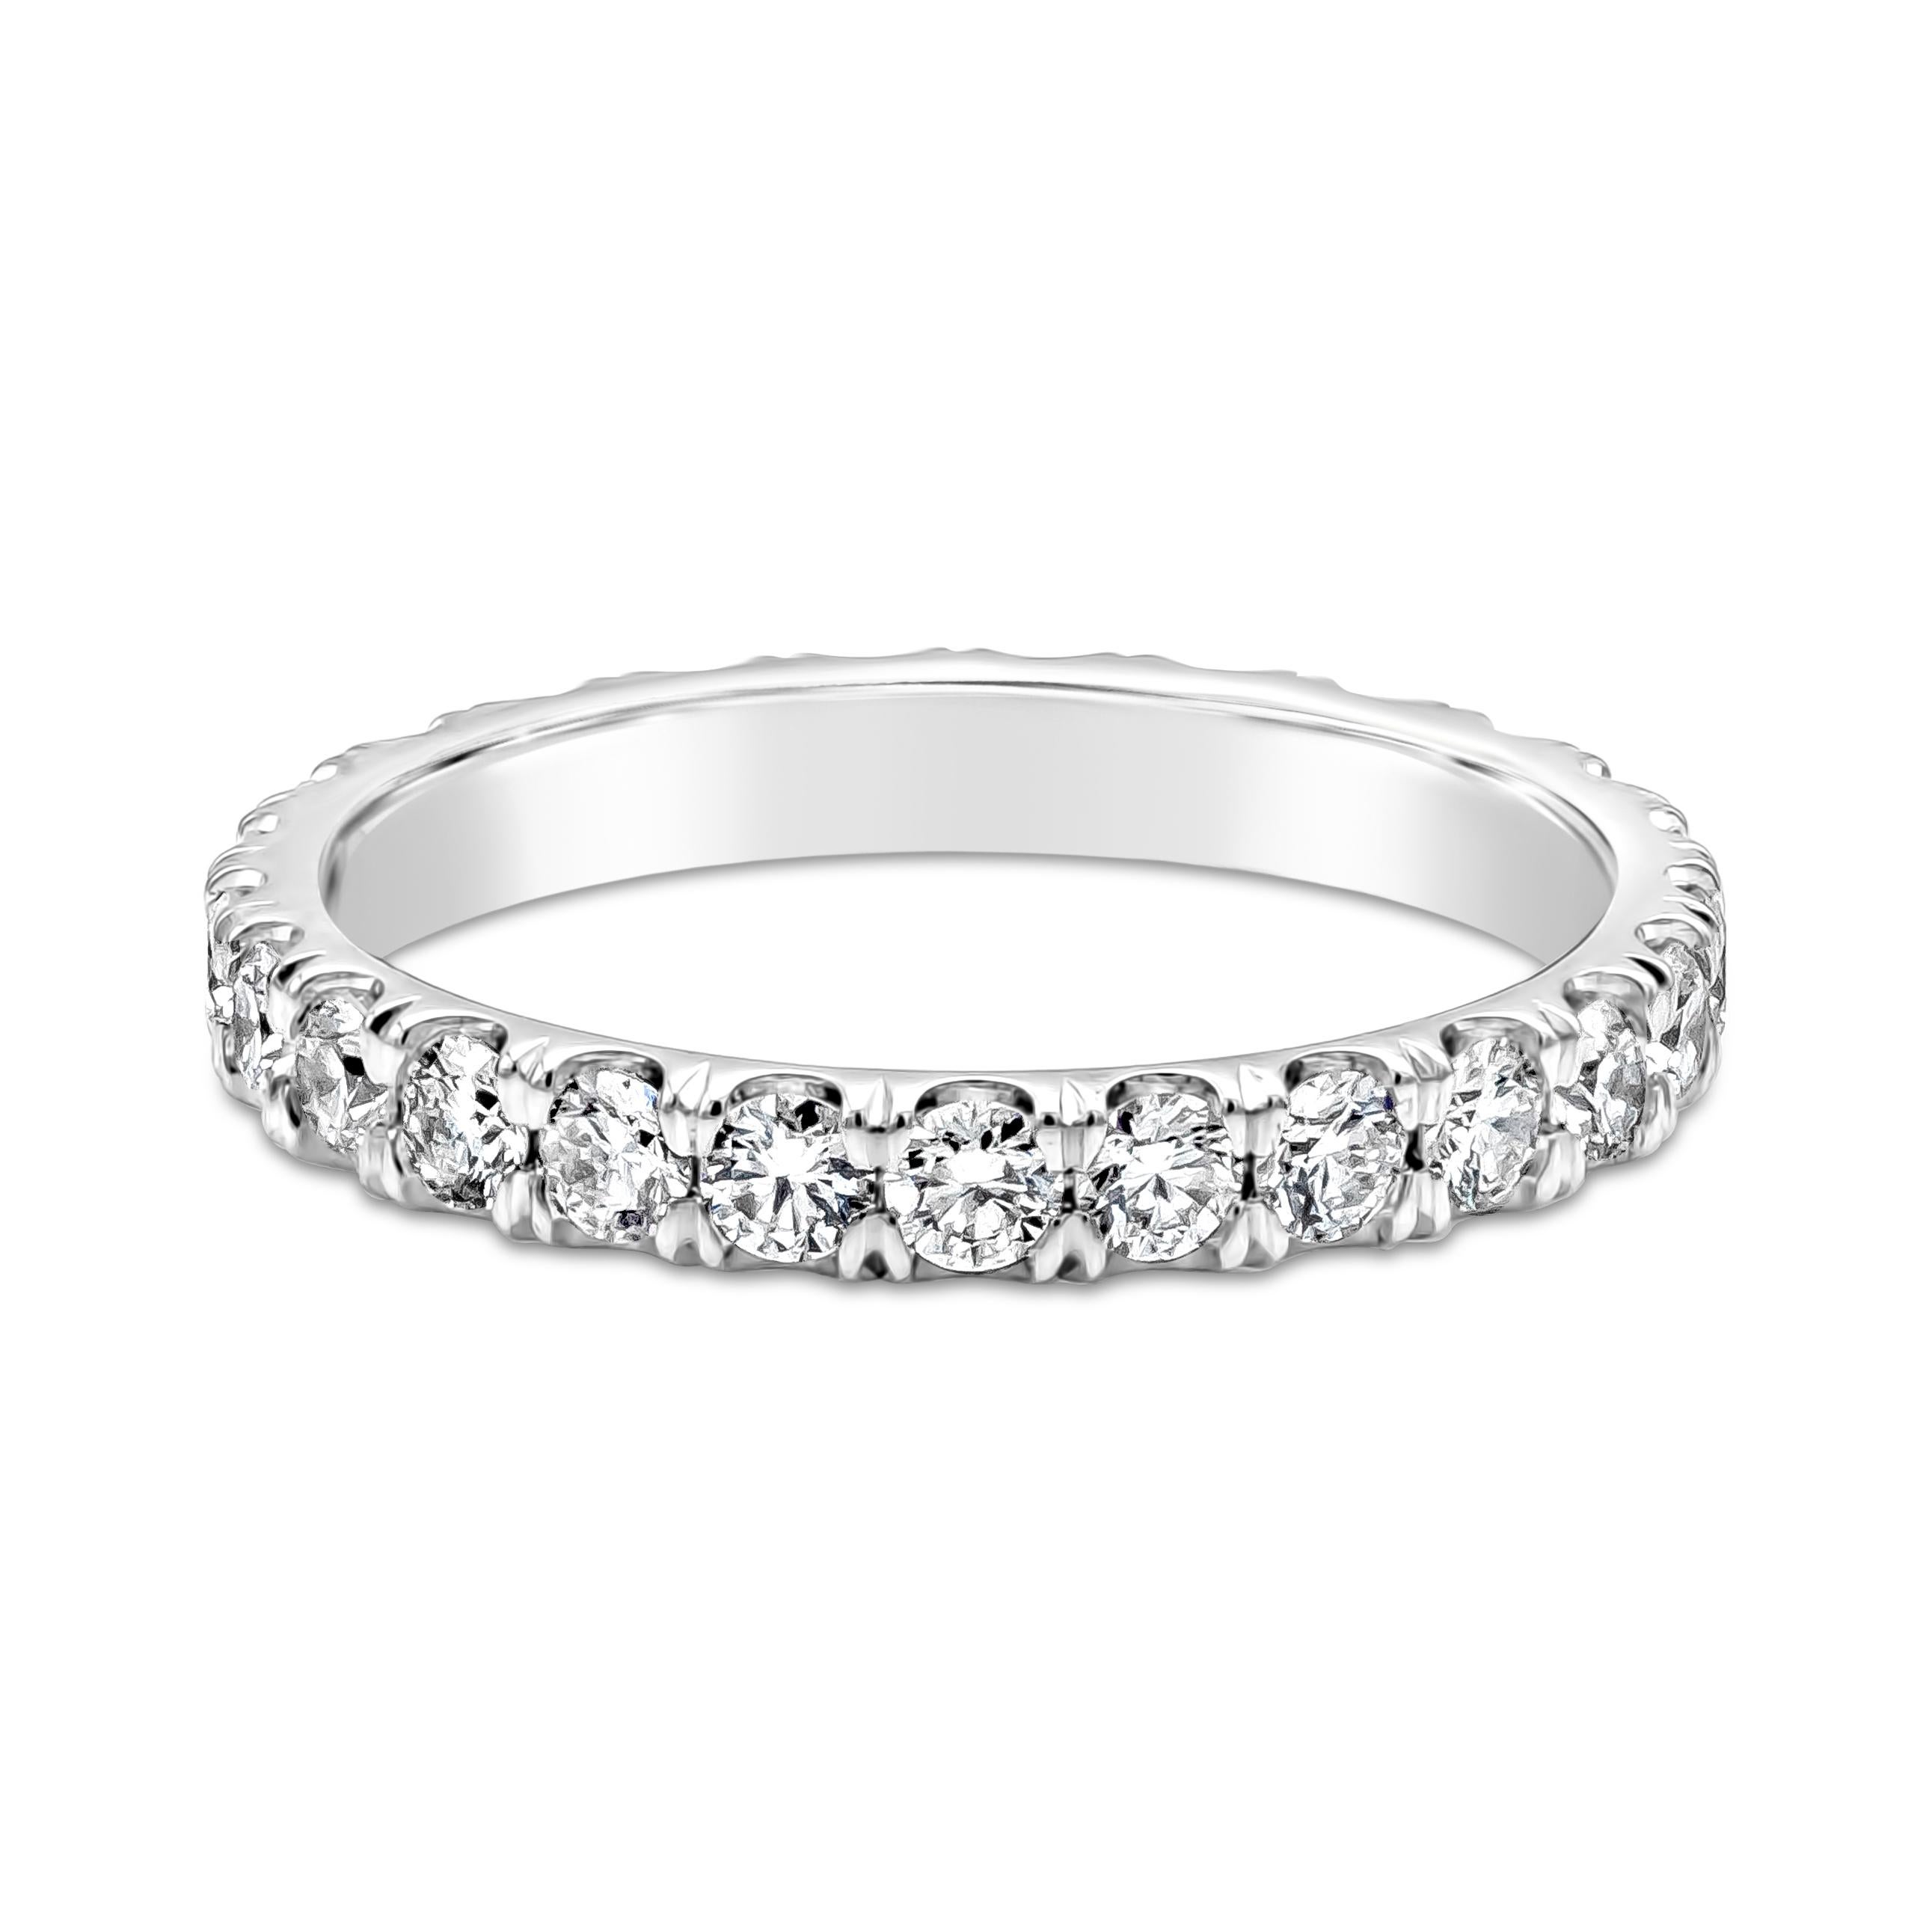 A classic eternity wedding band style showcasing a row of round brilliant diamonds weighing 1.02 carats total, F-G Color and VS in Clarity. Made with Platinum. 2.10mm in Width Size 6.5 US

Style available in different price ranges. Prices are based